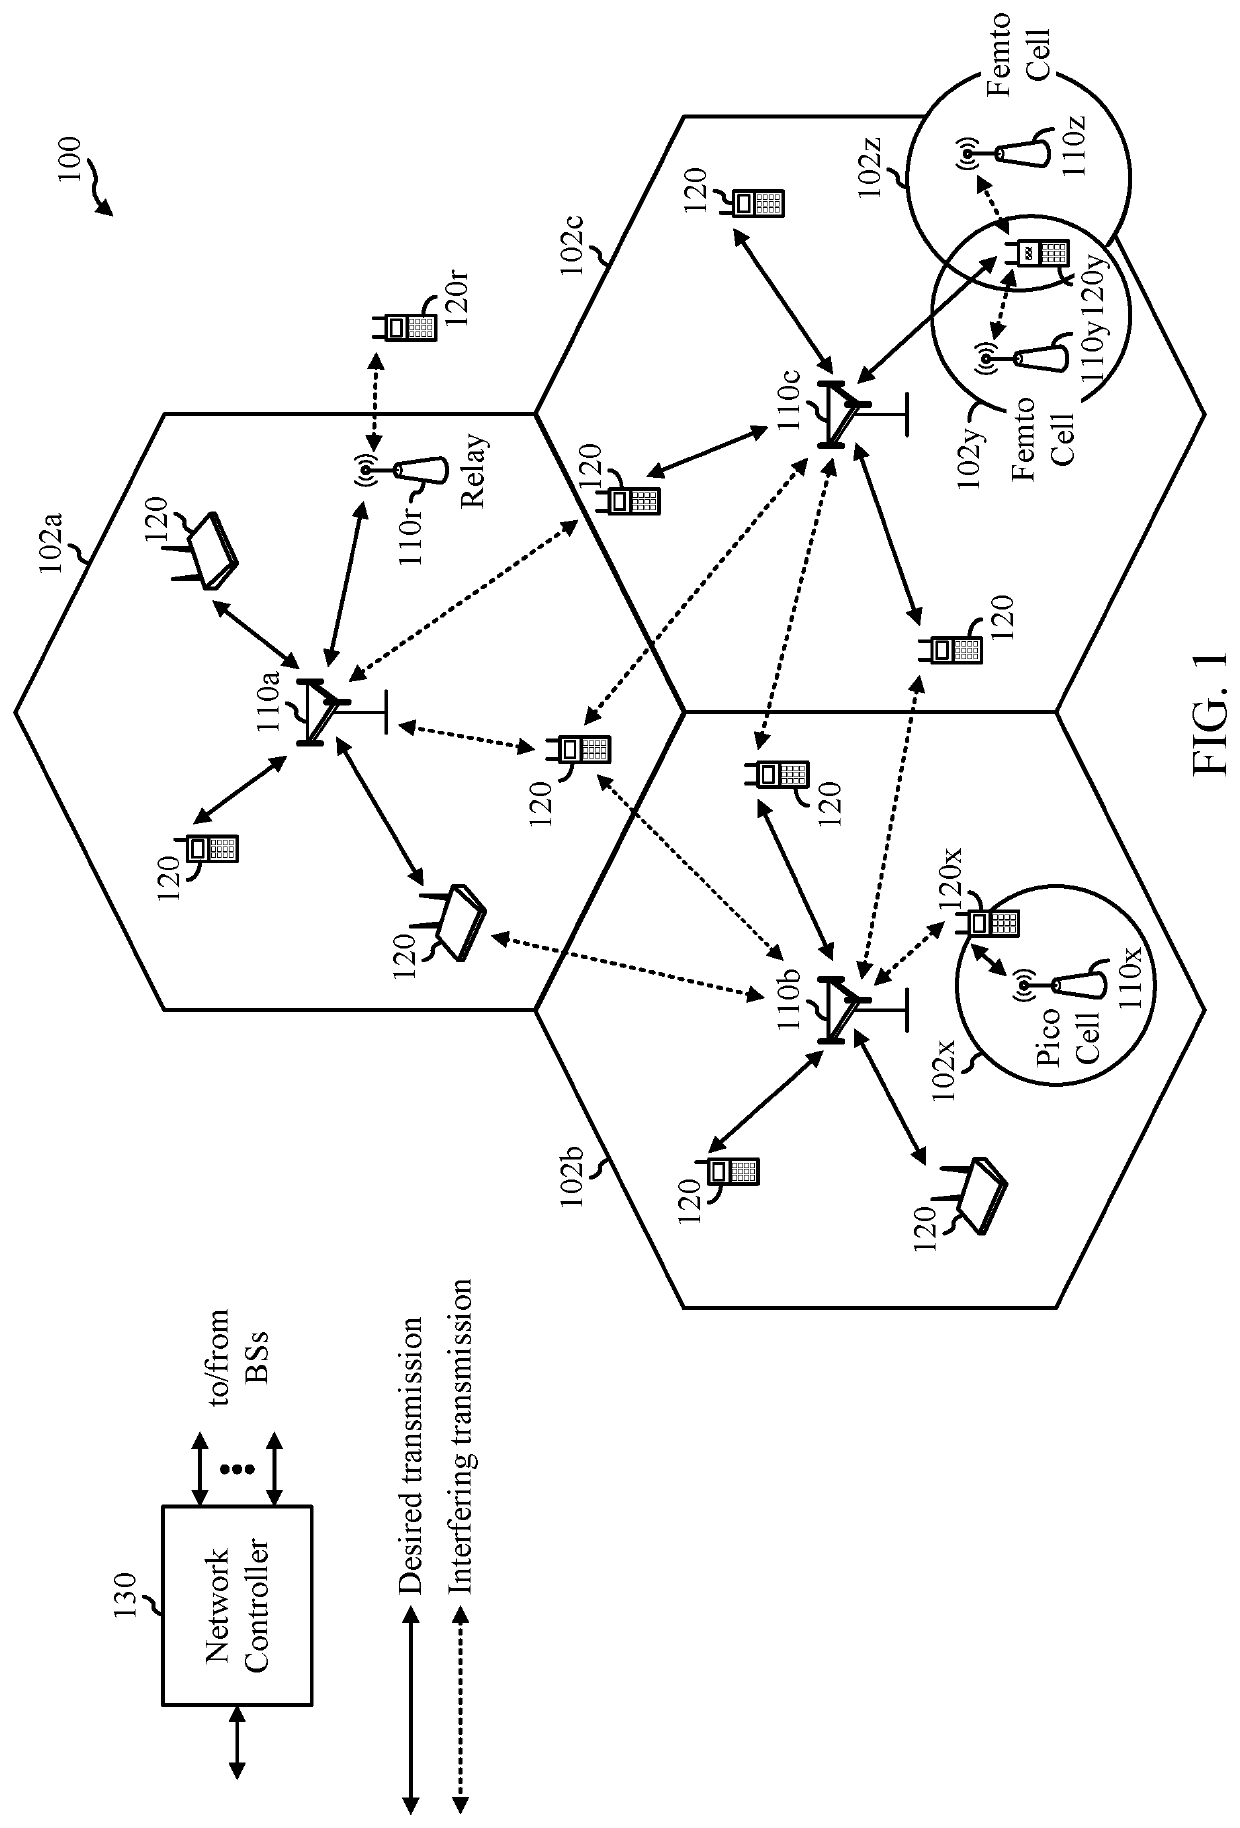 Reduction of self-interference in full-duplex communication